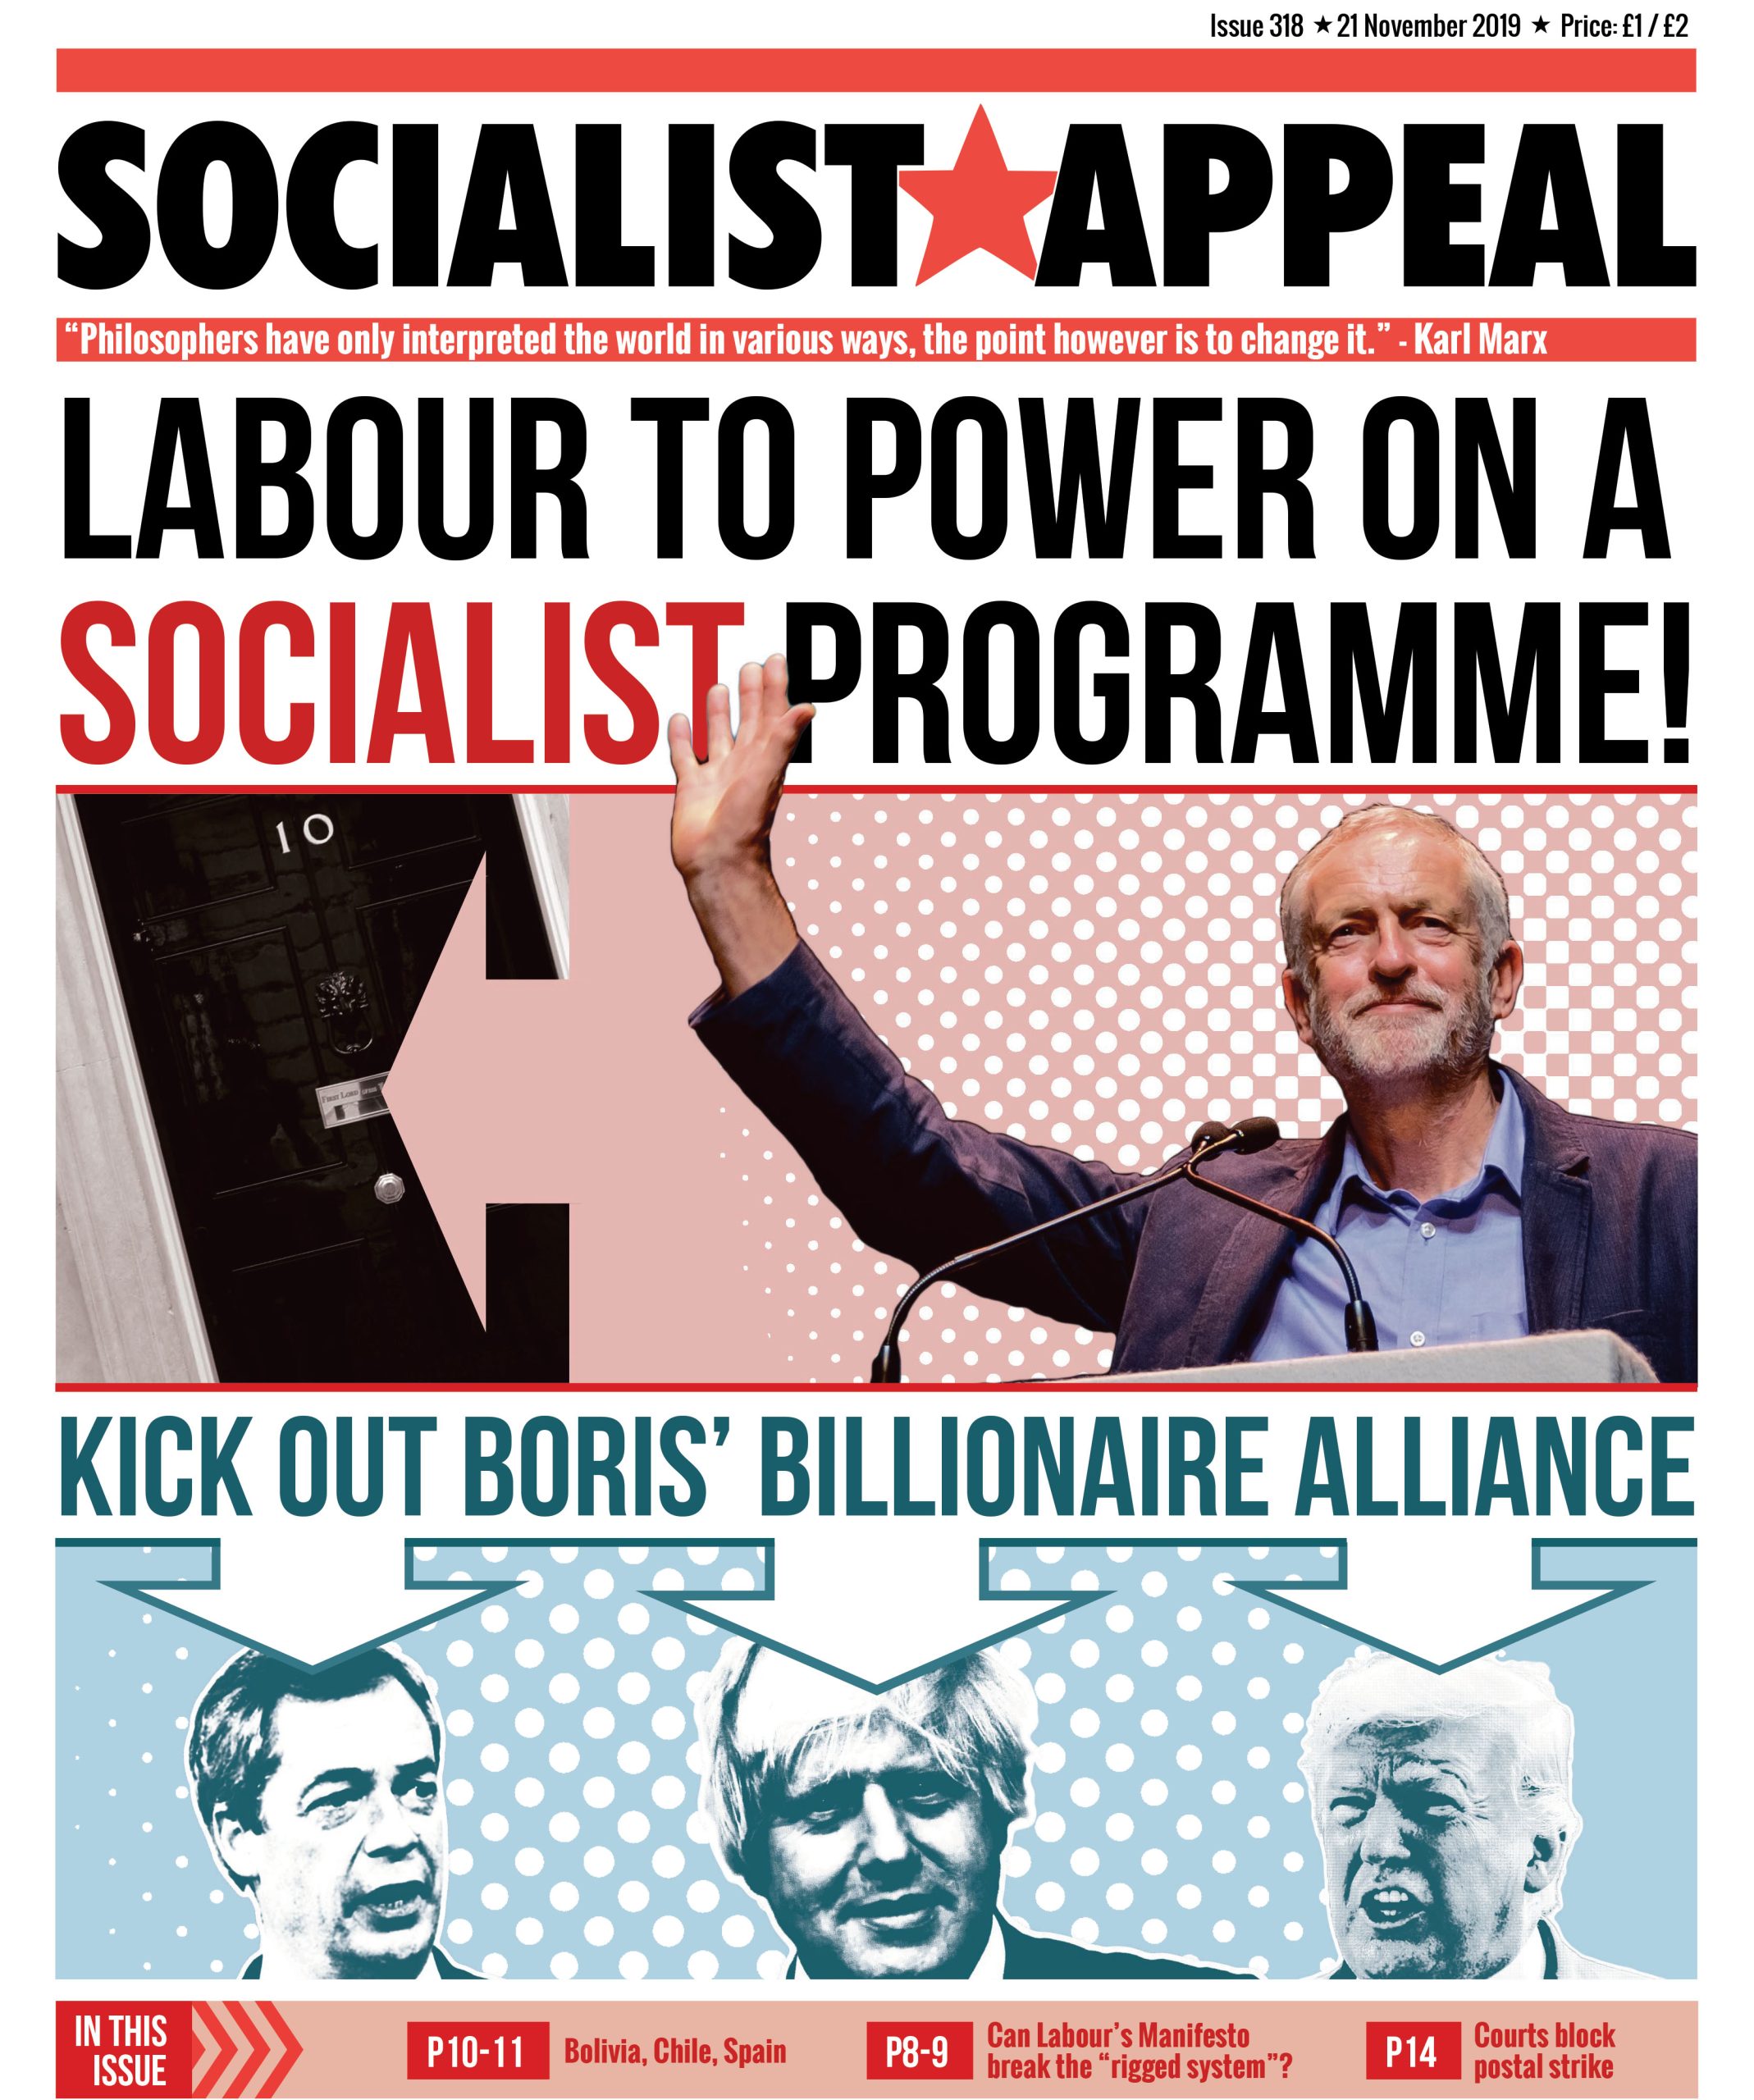 Labour to power on a socialist programme scaled Image Socialist Appeal